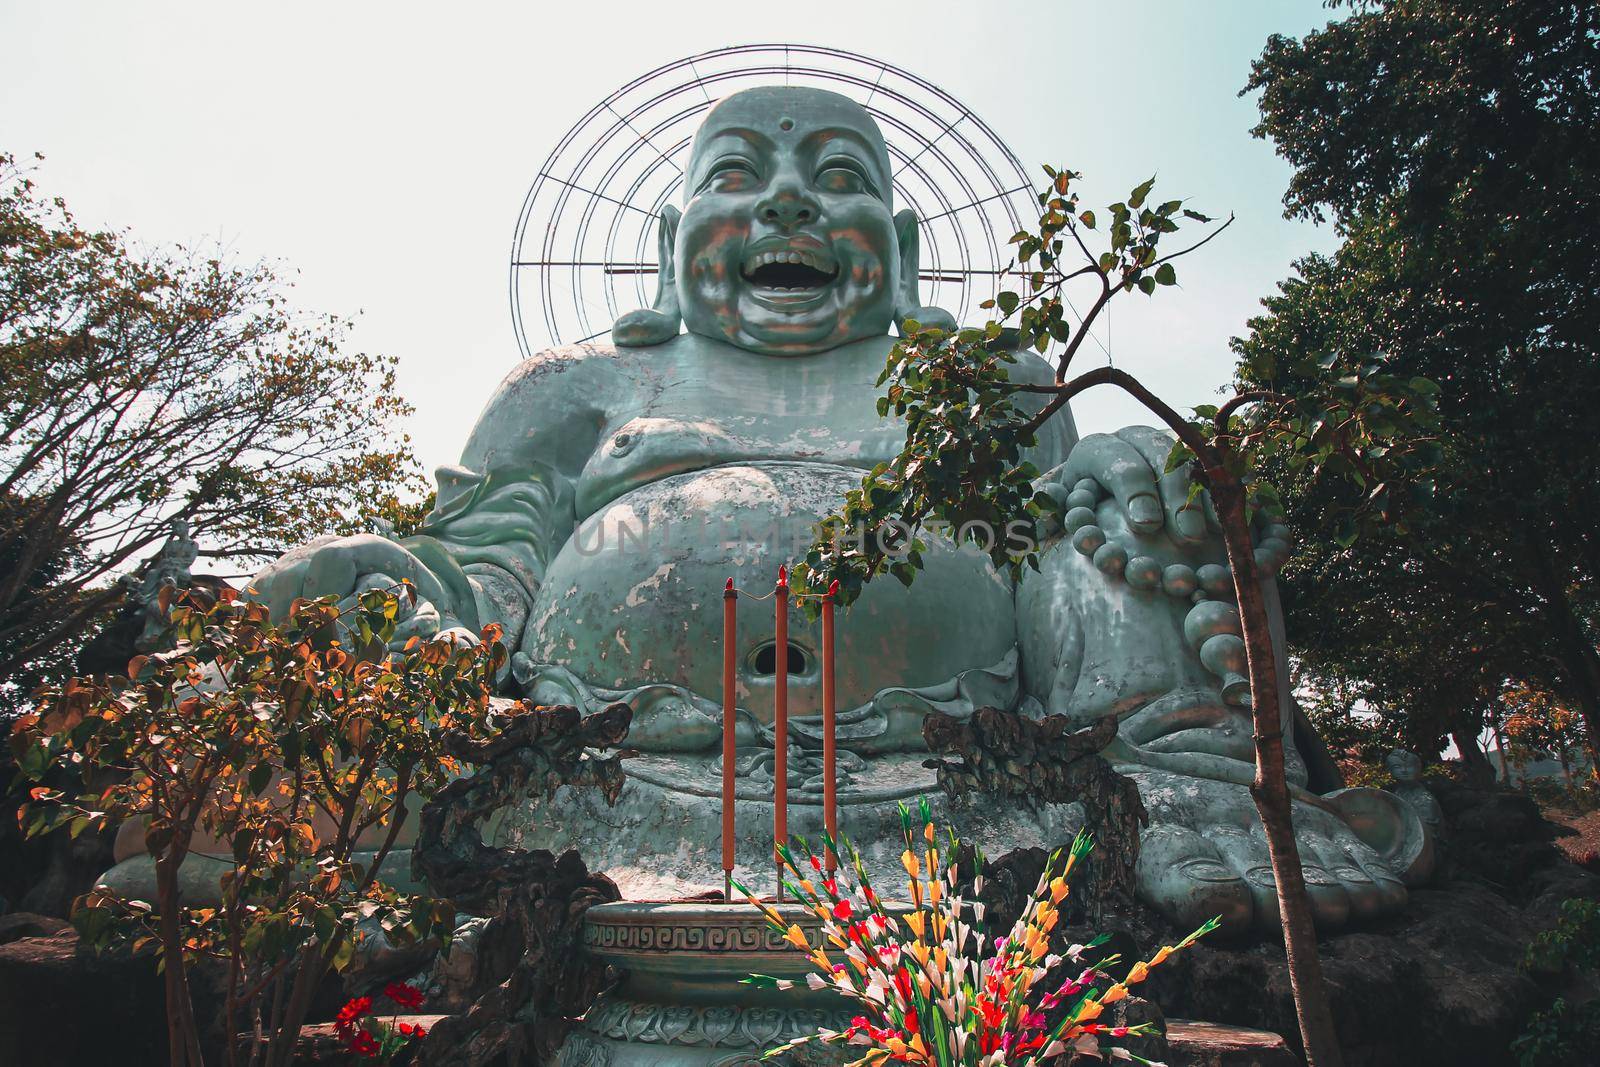 Low angle view of a giant Smiling Buddha Statue in Linh An Pagoda in Da lat, Vietnam